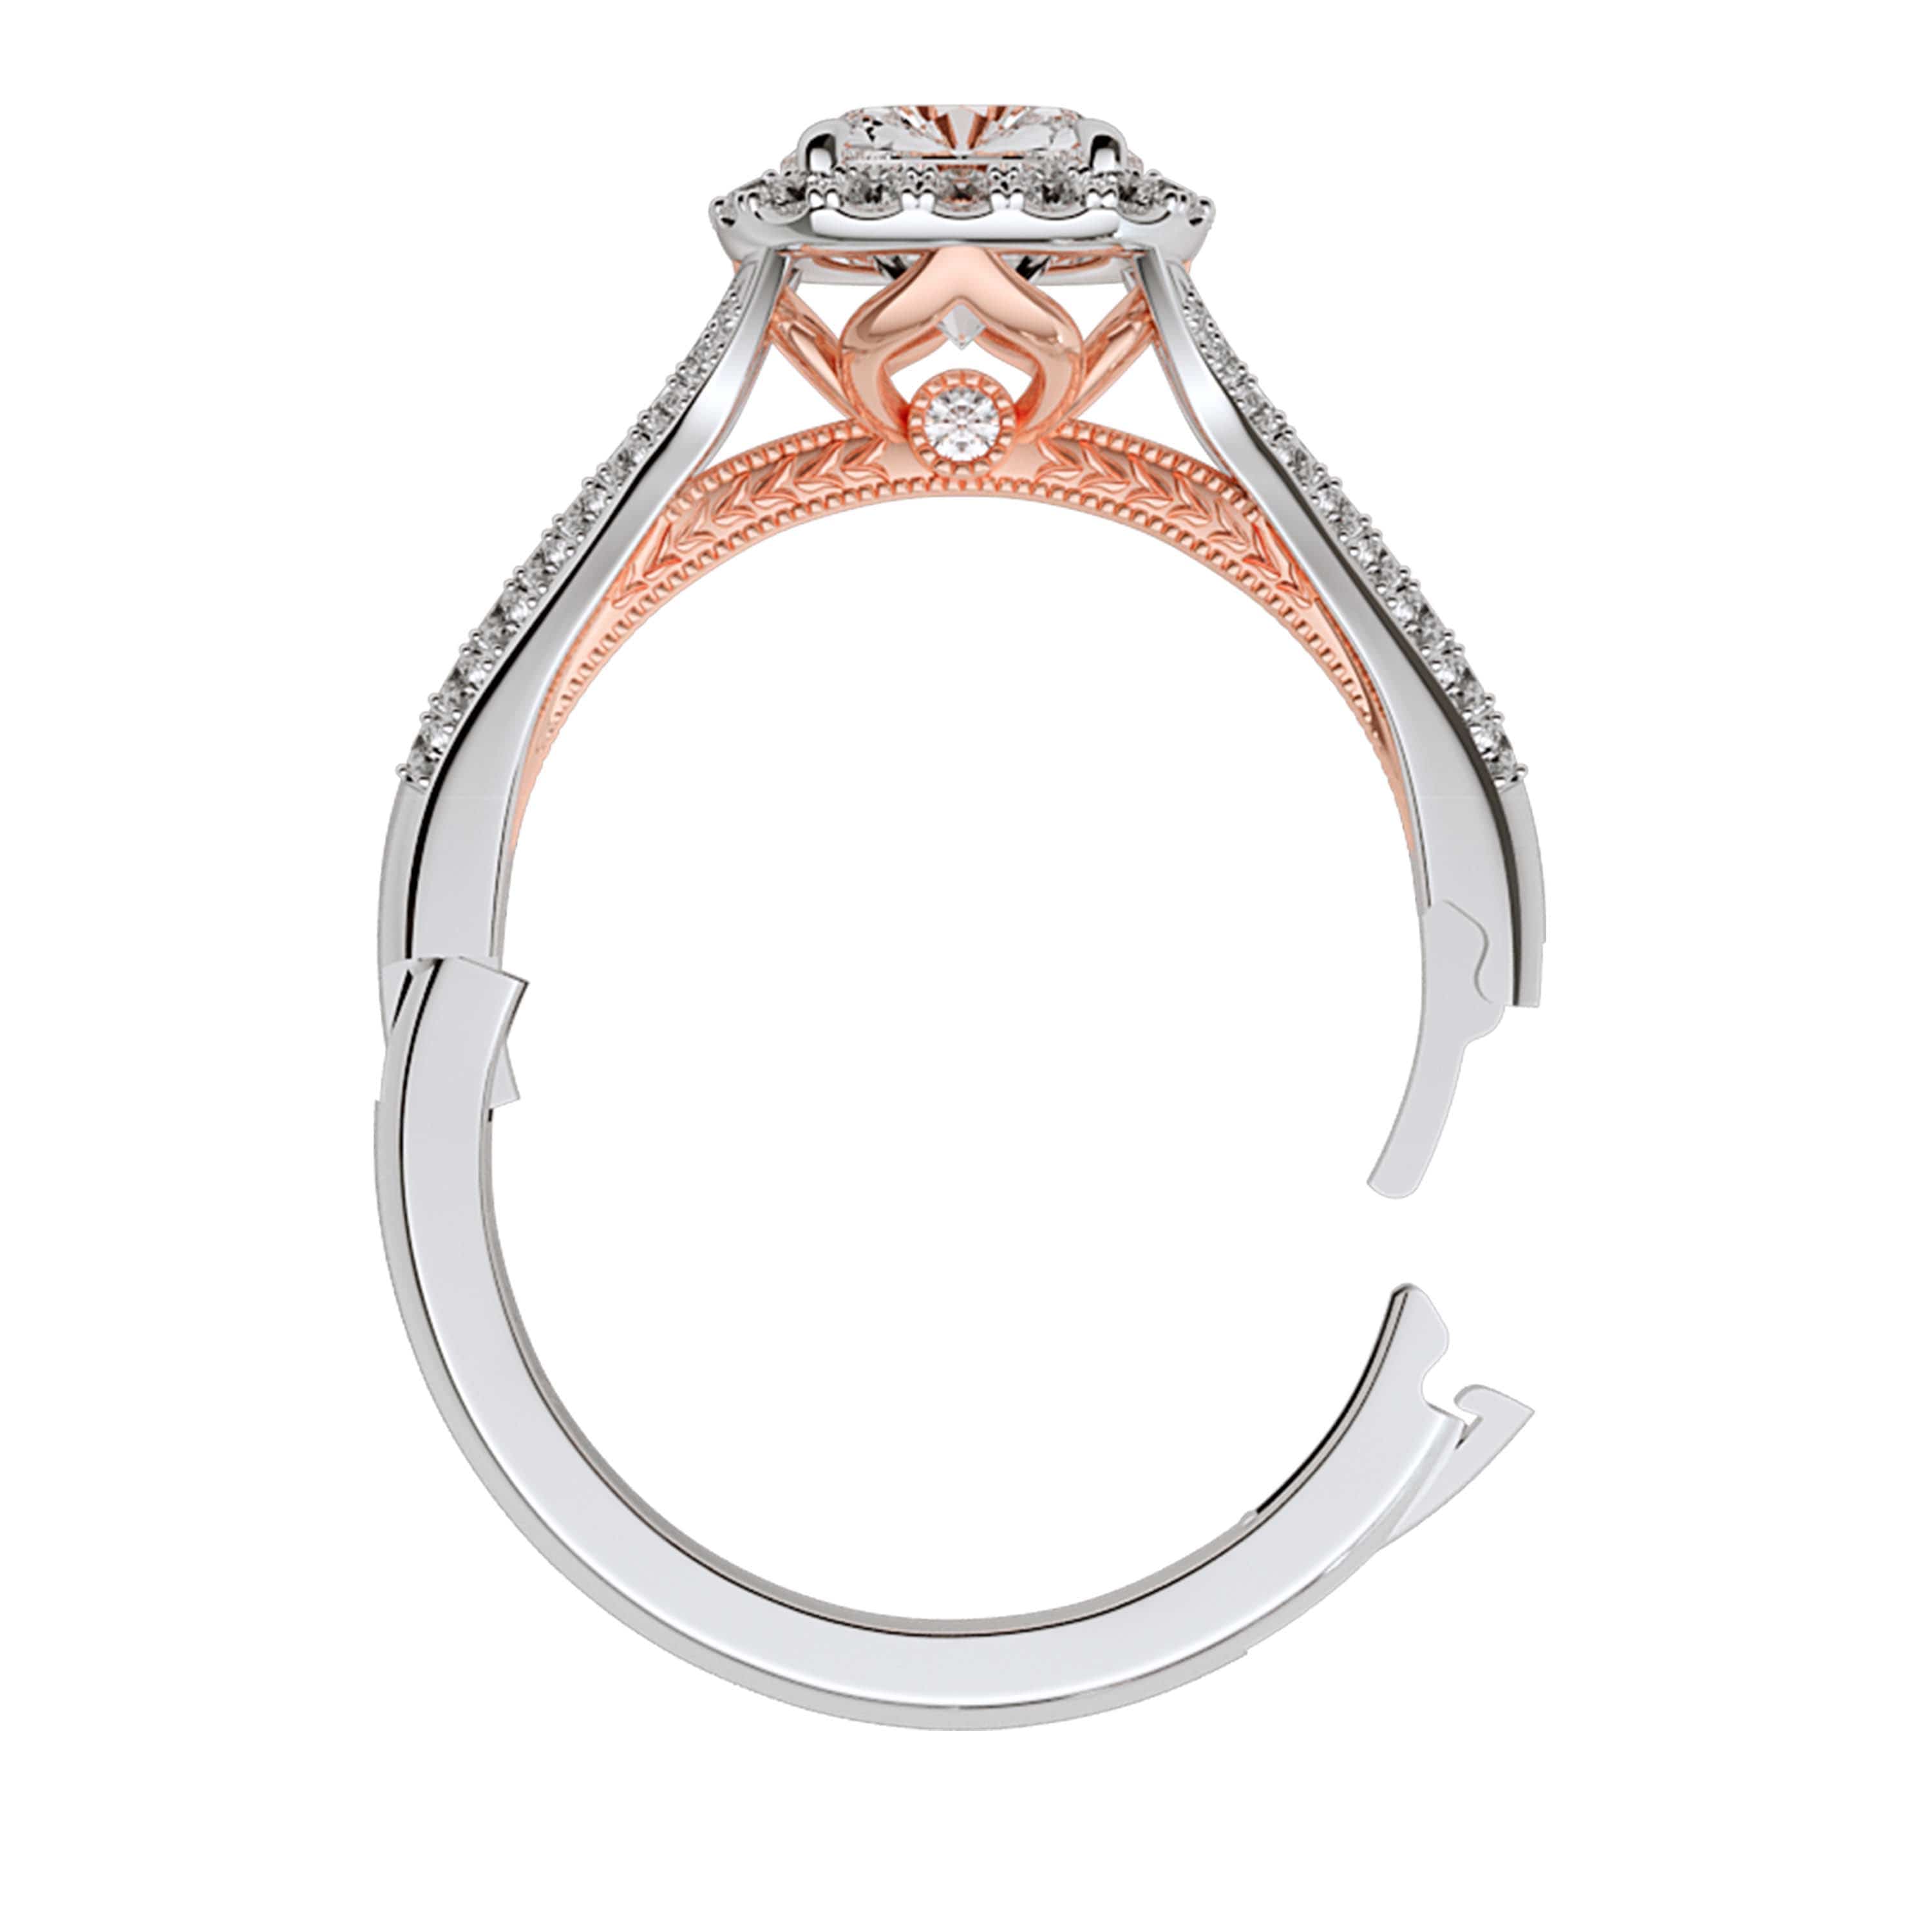 CLIQ Jewelry  You deserve a ring that fits